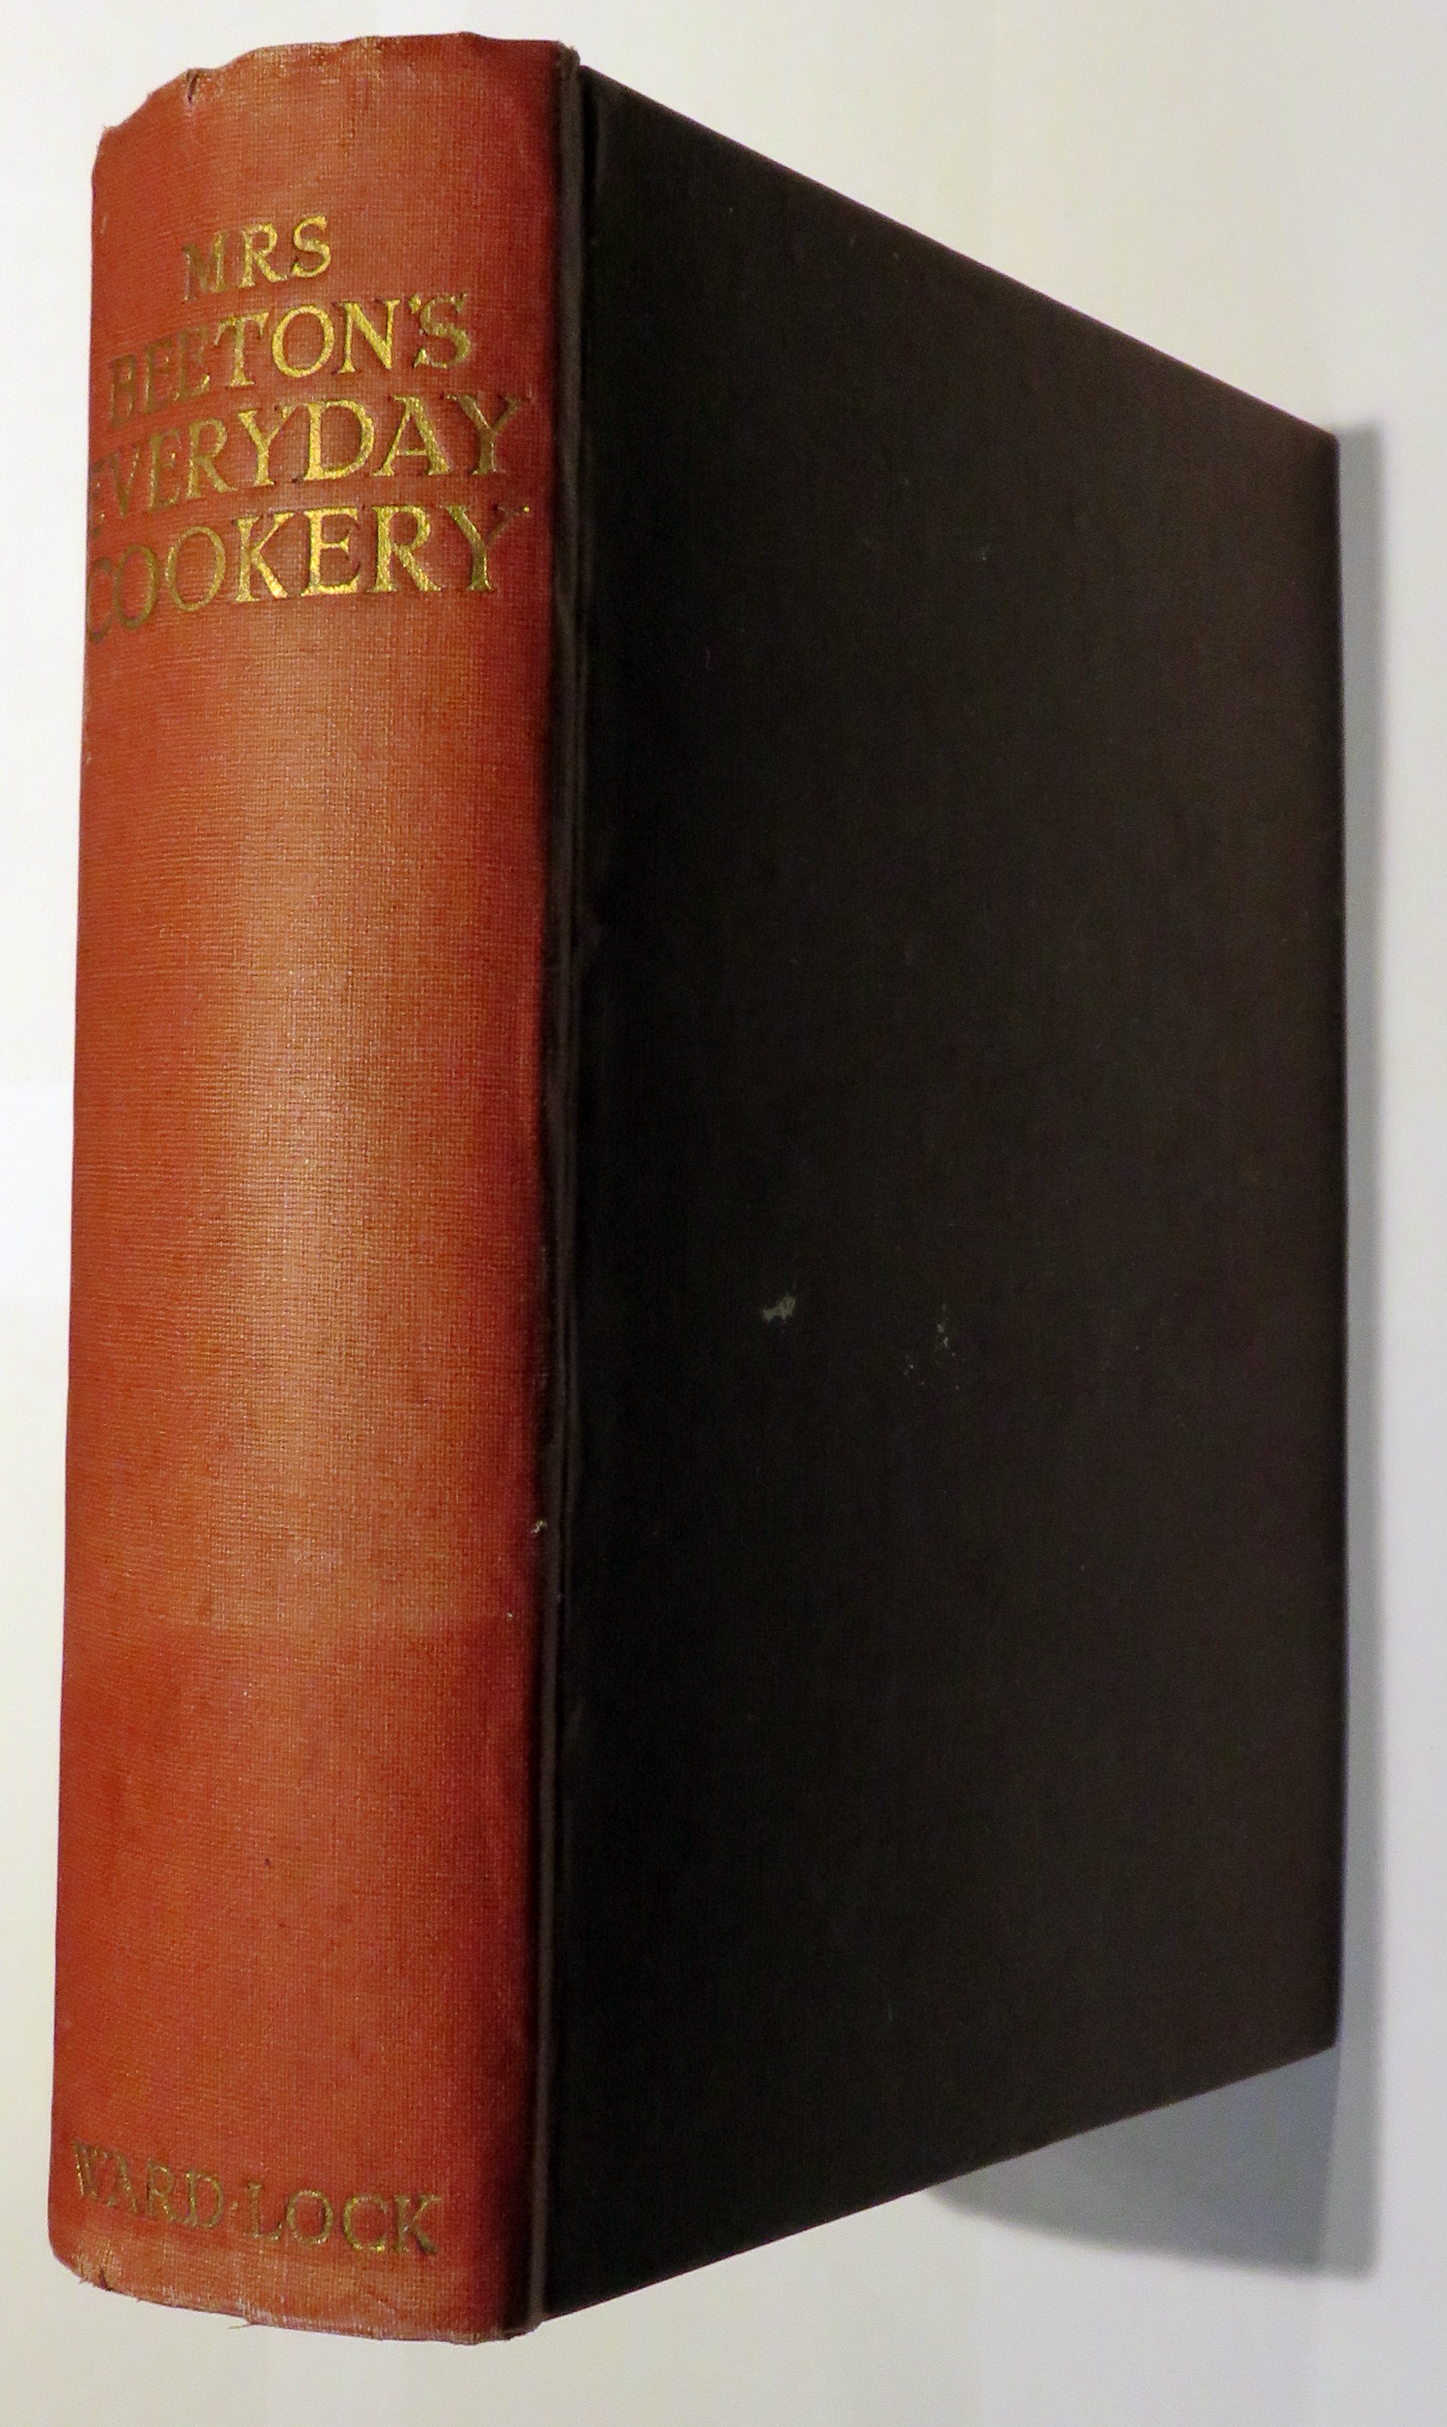 Mrs Beeton's Every Day Cookery With About 2,500 Practical Recipes 